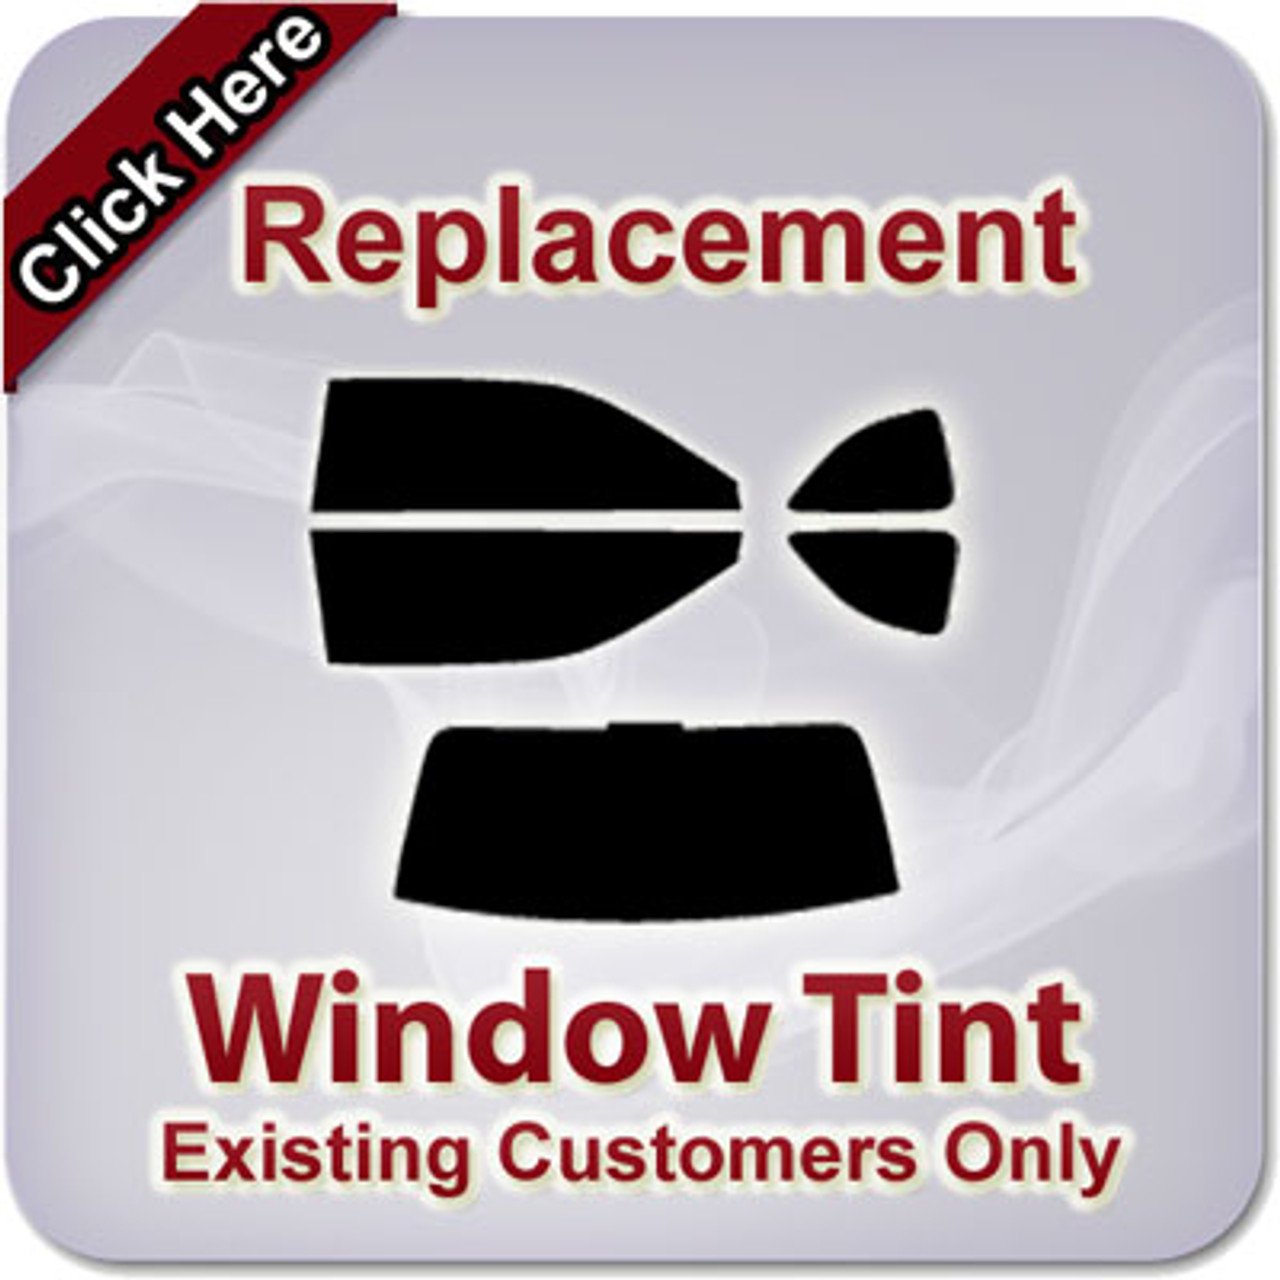 Replacement Window Tint - For Existing Customers